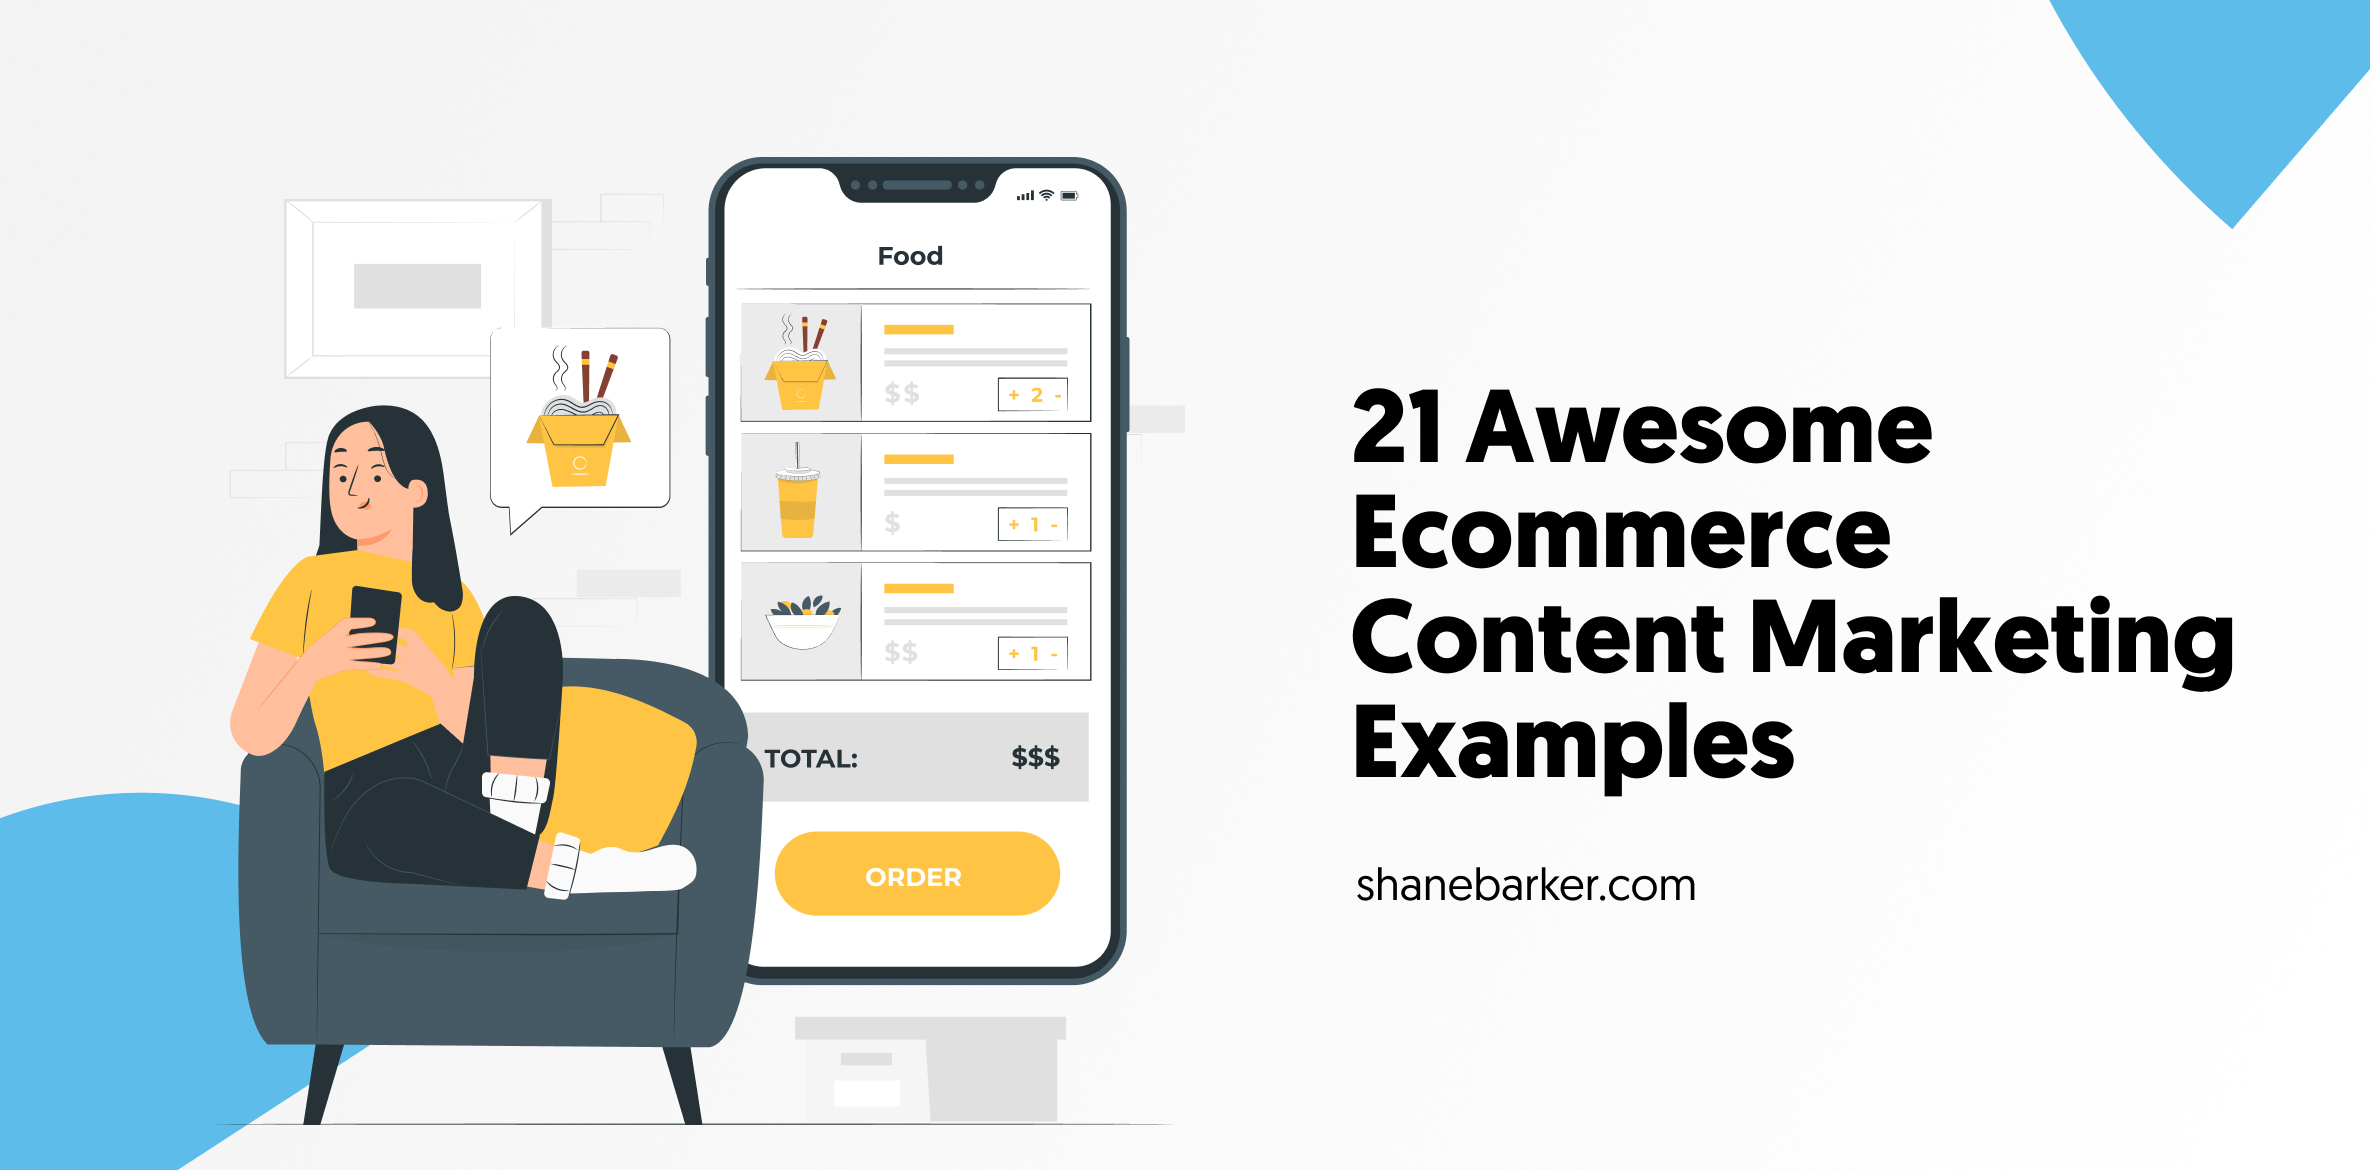 21 Awesome Ecommerce Content Marketing Examples